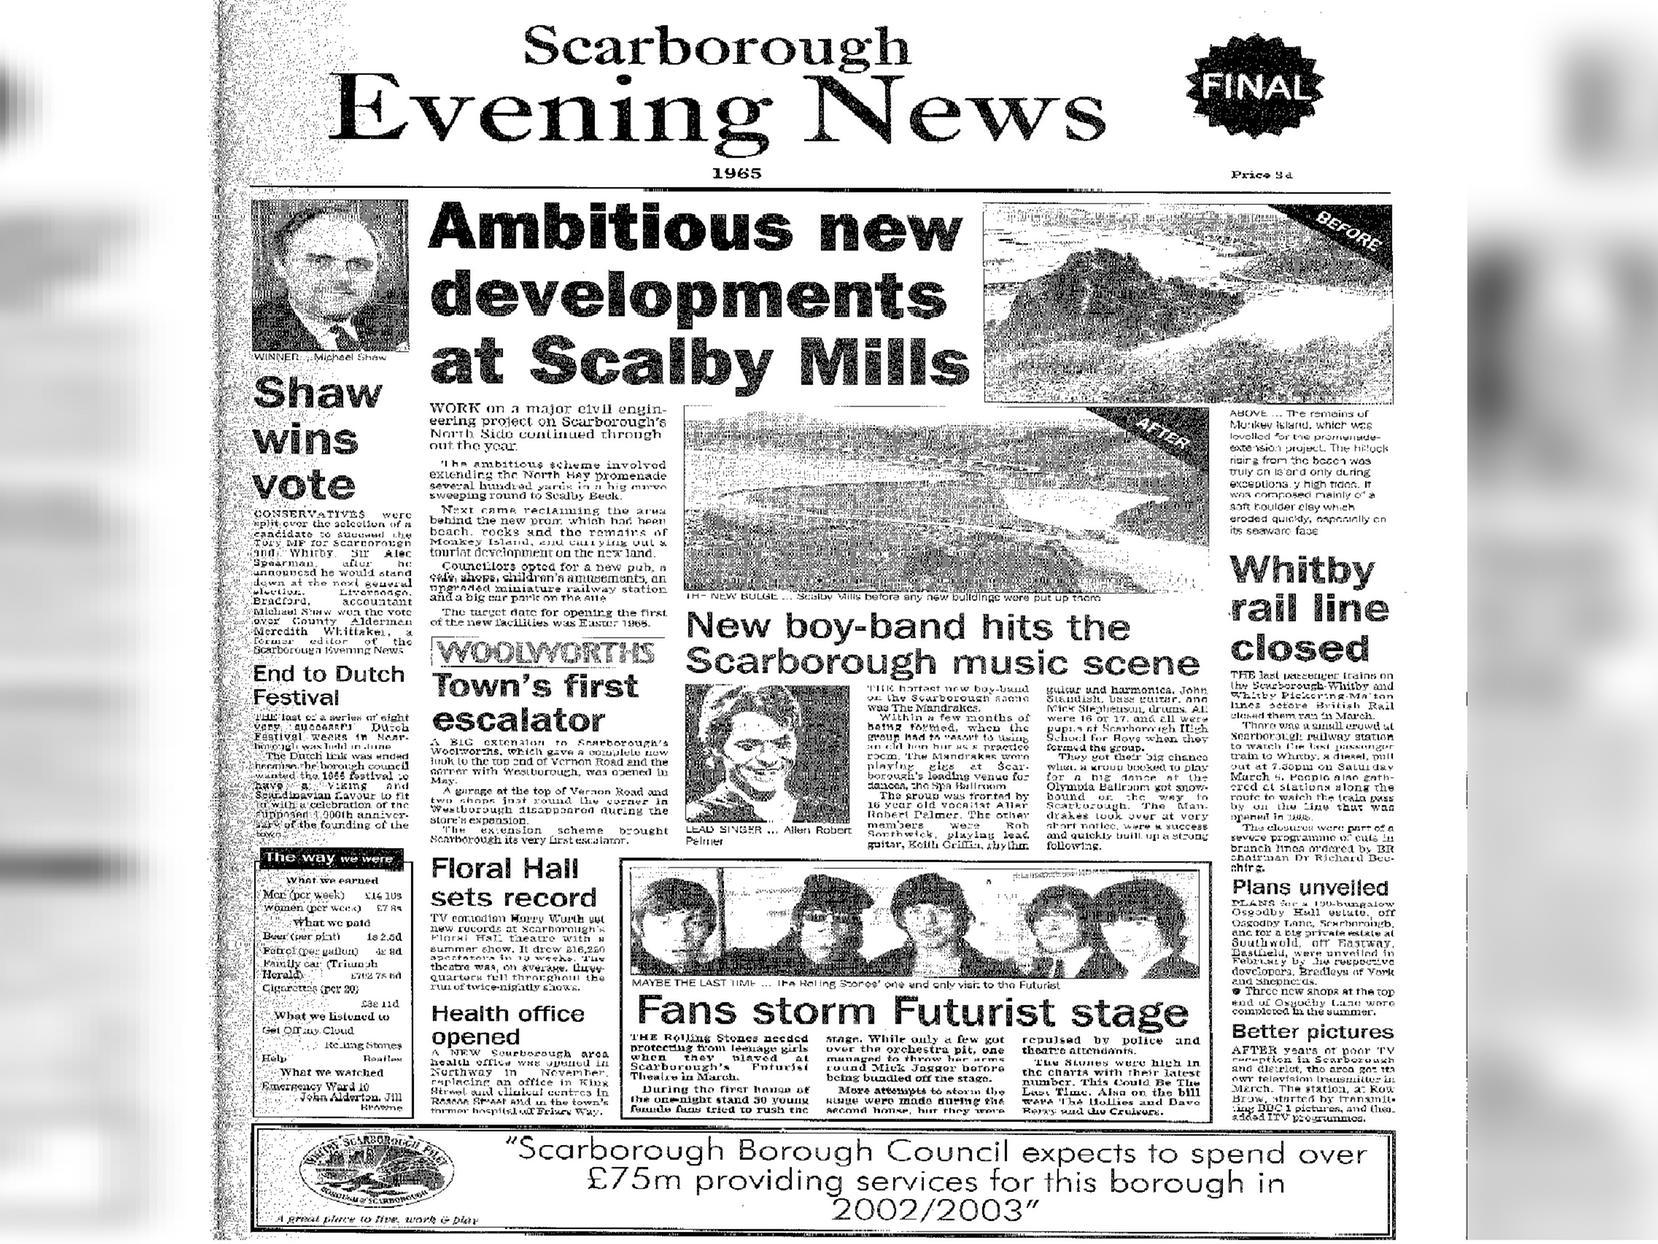 Works to develop Scalby Mills continued throughout the year. Also in 1965, the Scarborough-Whitby railway line closed and Woolworths opened what was then Scarborough's first escalator.